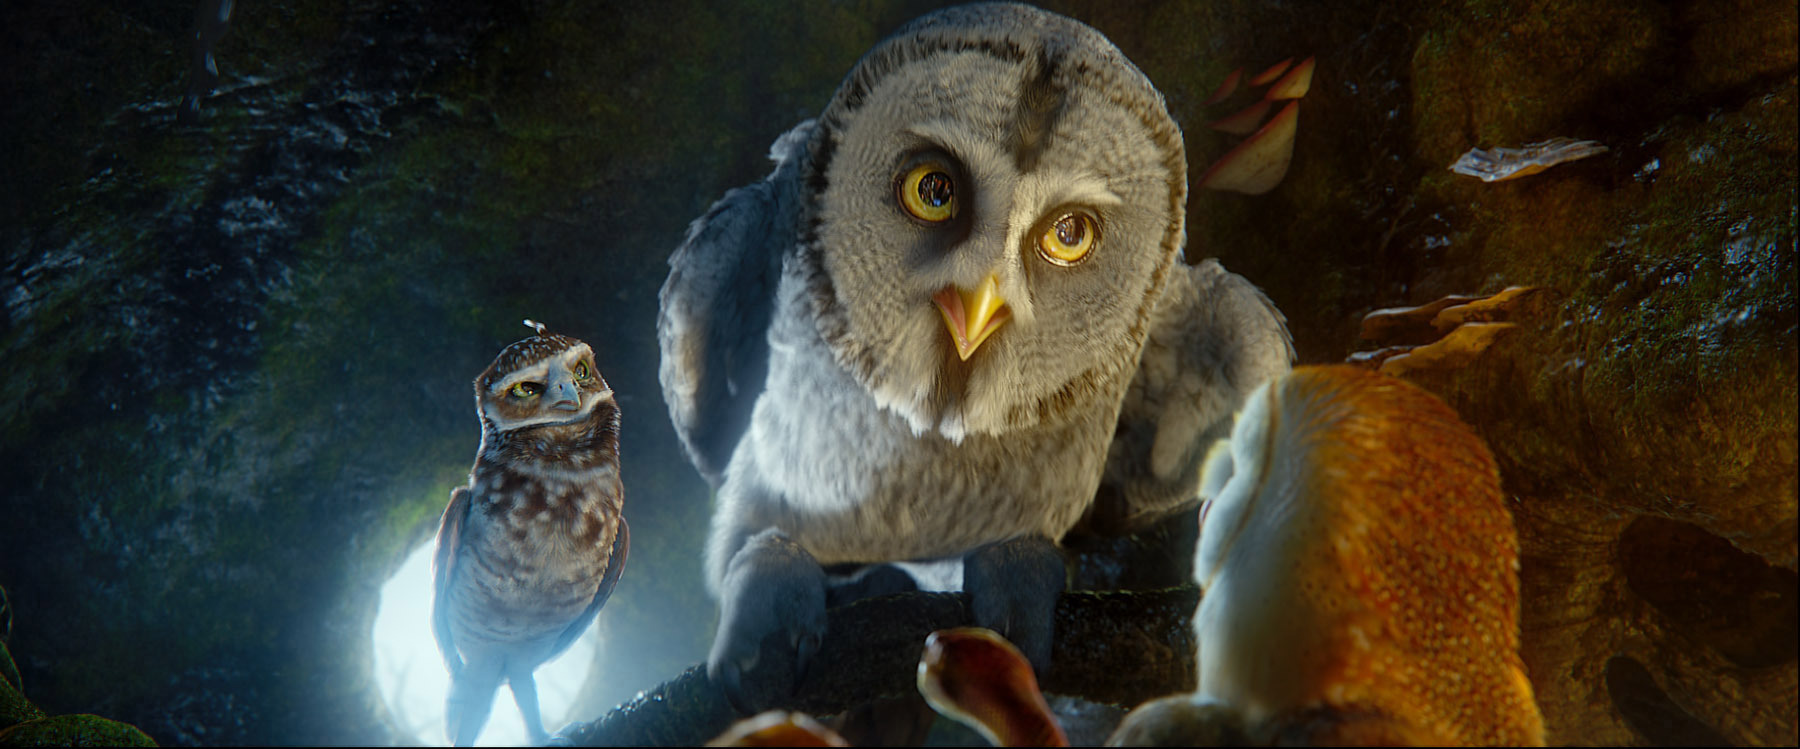 Still of Miriam Margolyes, Jim Sturgess and David Wenham in Legend of the Guardians: The Owls of Ga'Hoole (2010)